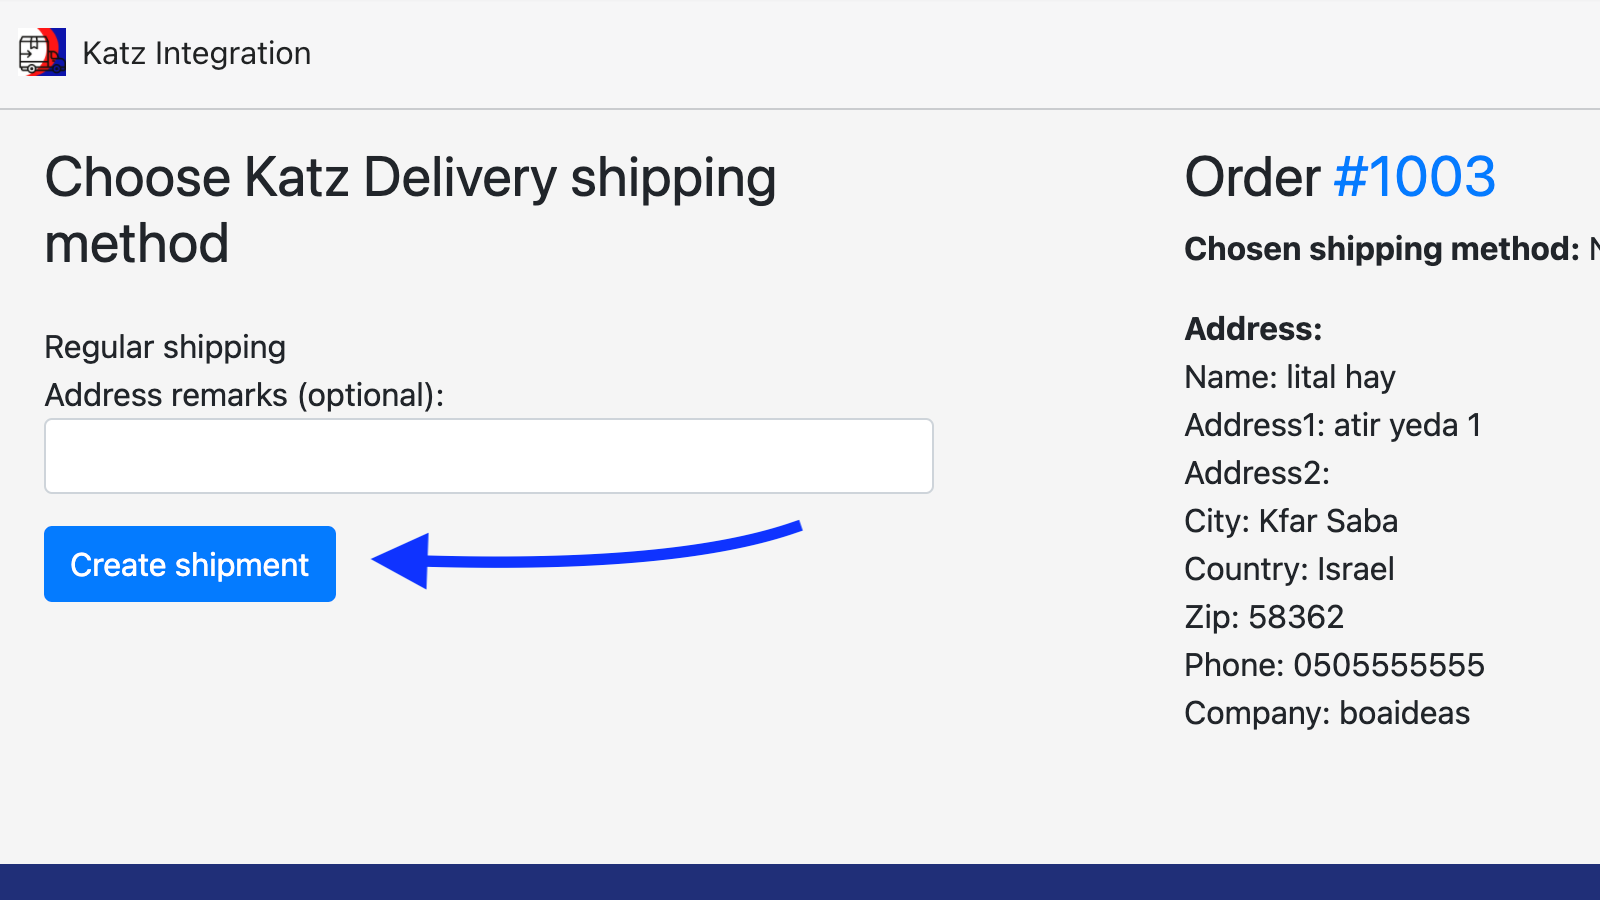 All the order data is pulled and only one click for a shipment